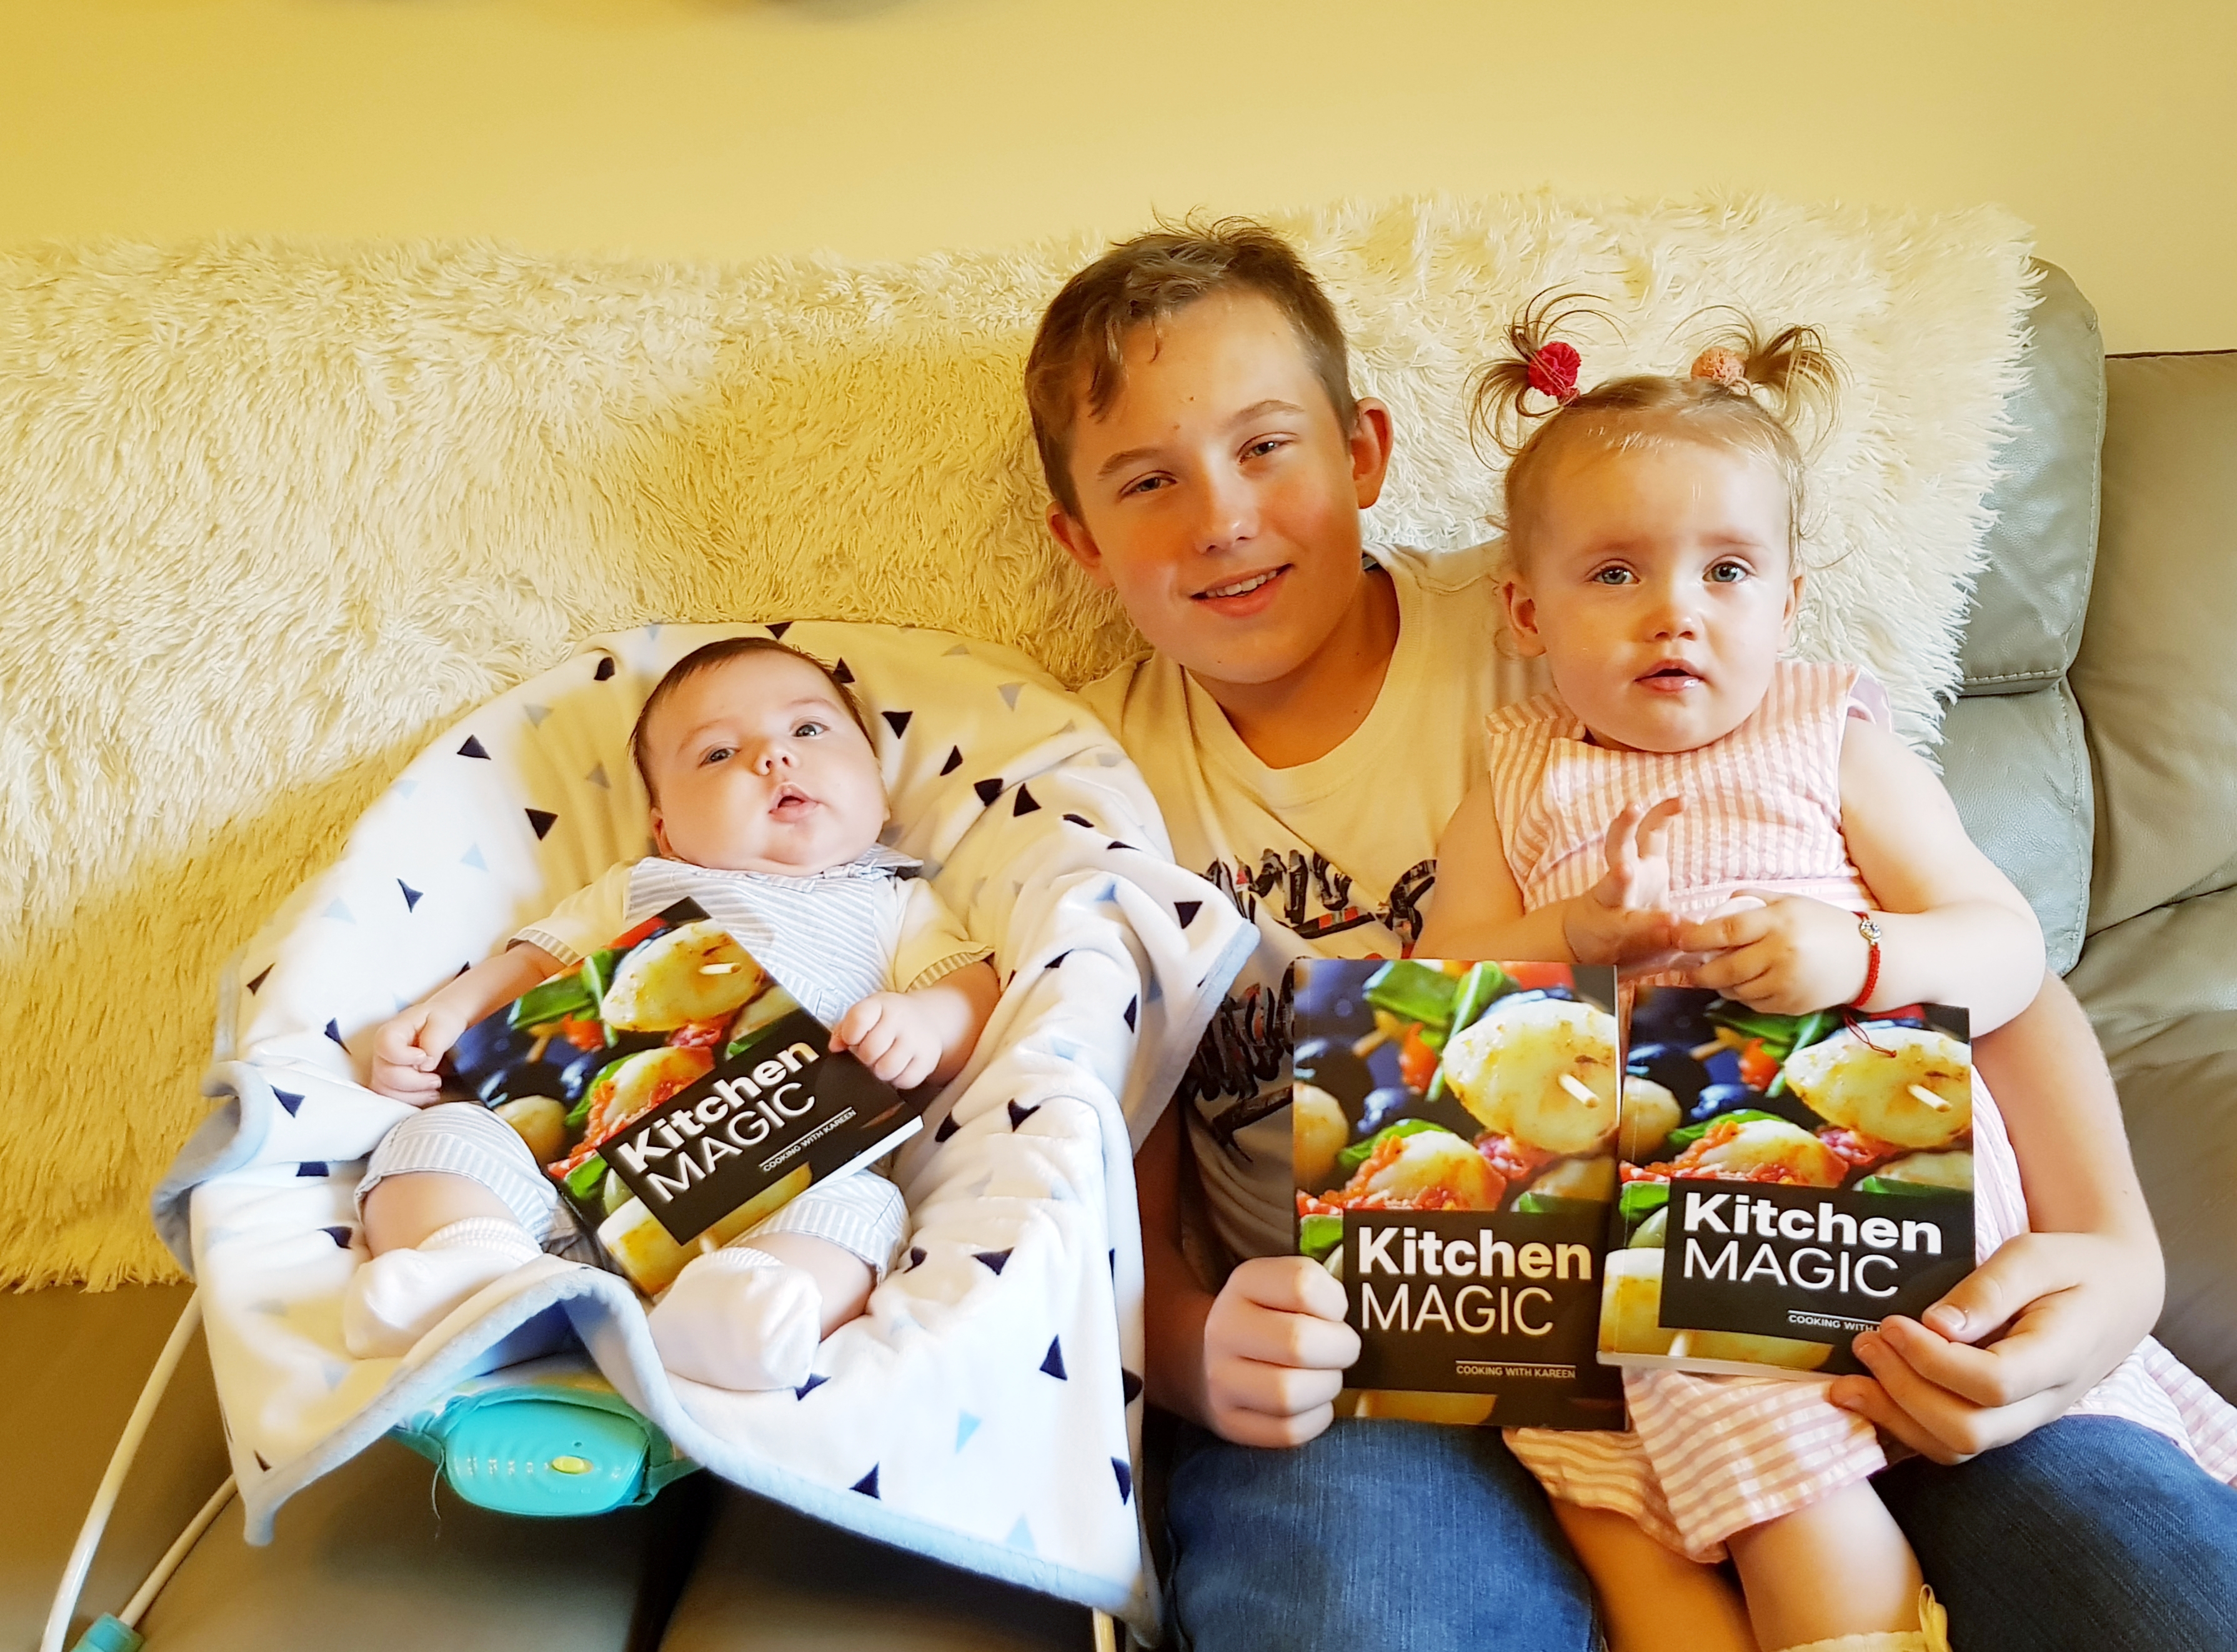 Karen and Robert Horne's grandchildren with the published cookbook written by their late grandparents.